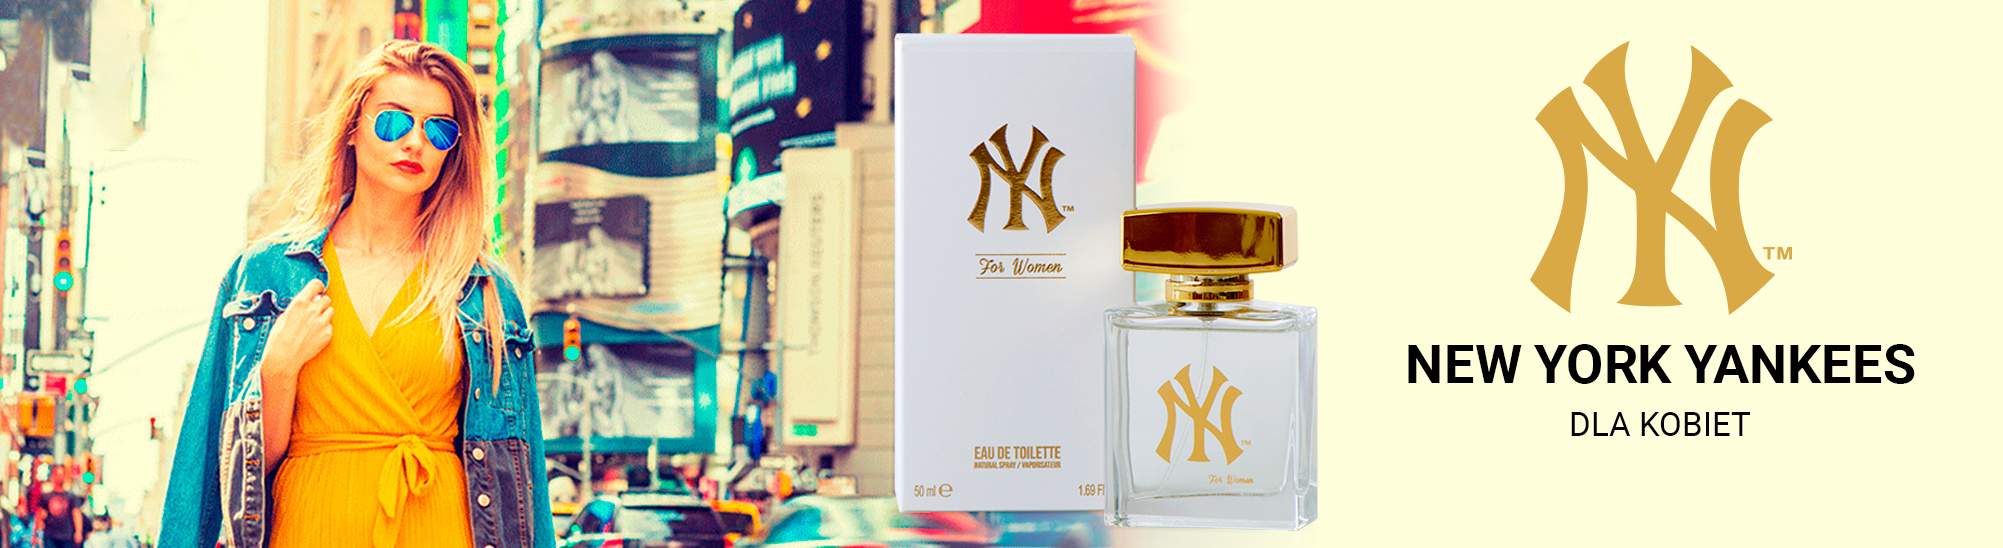 [New York Yankees For Woman]